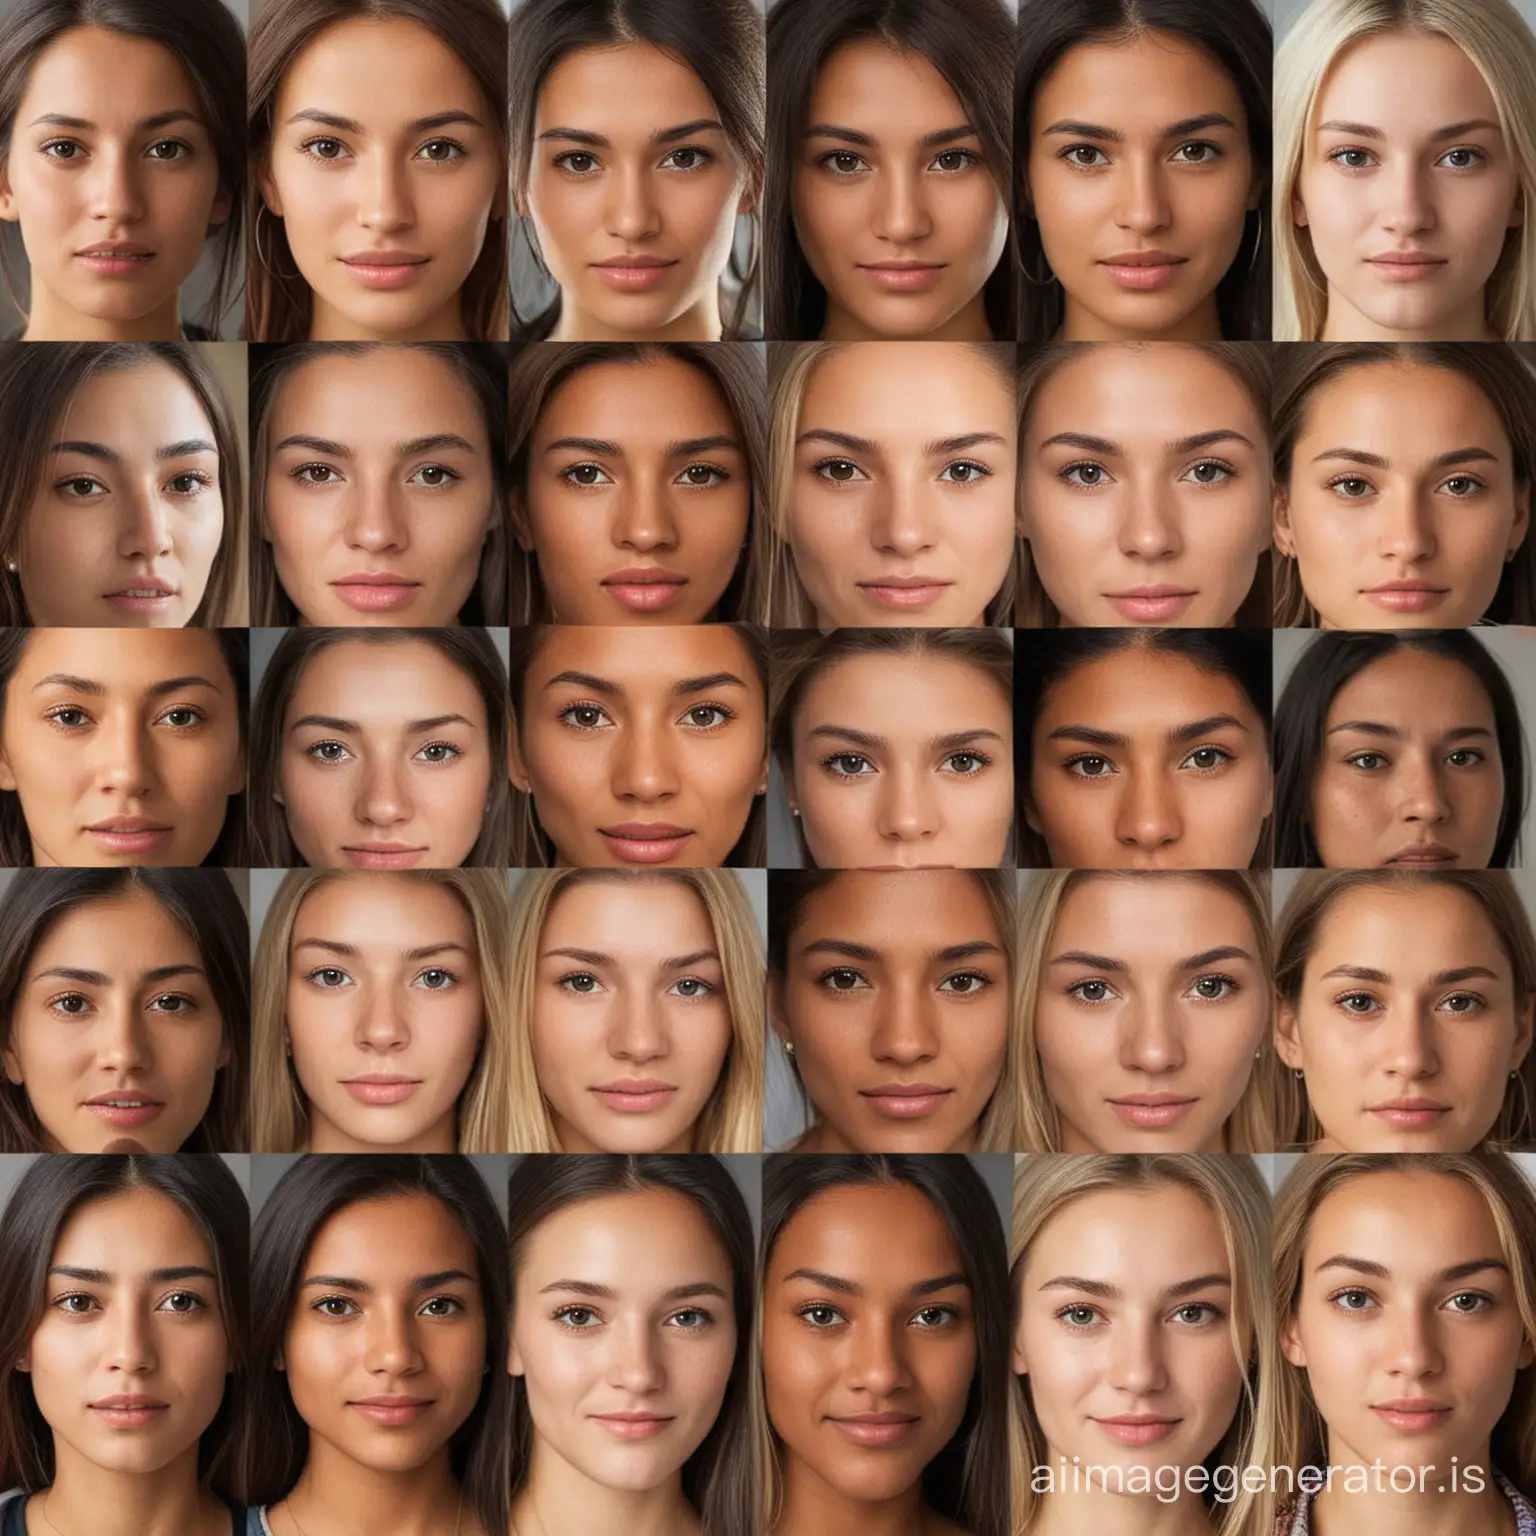 Global-Diversity-Portraits-of-Women-from-Various-Countries